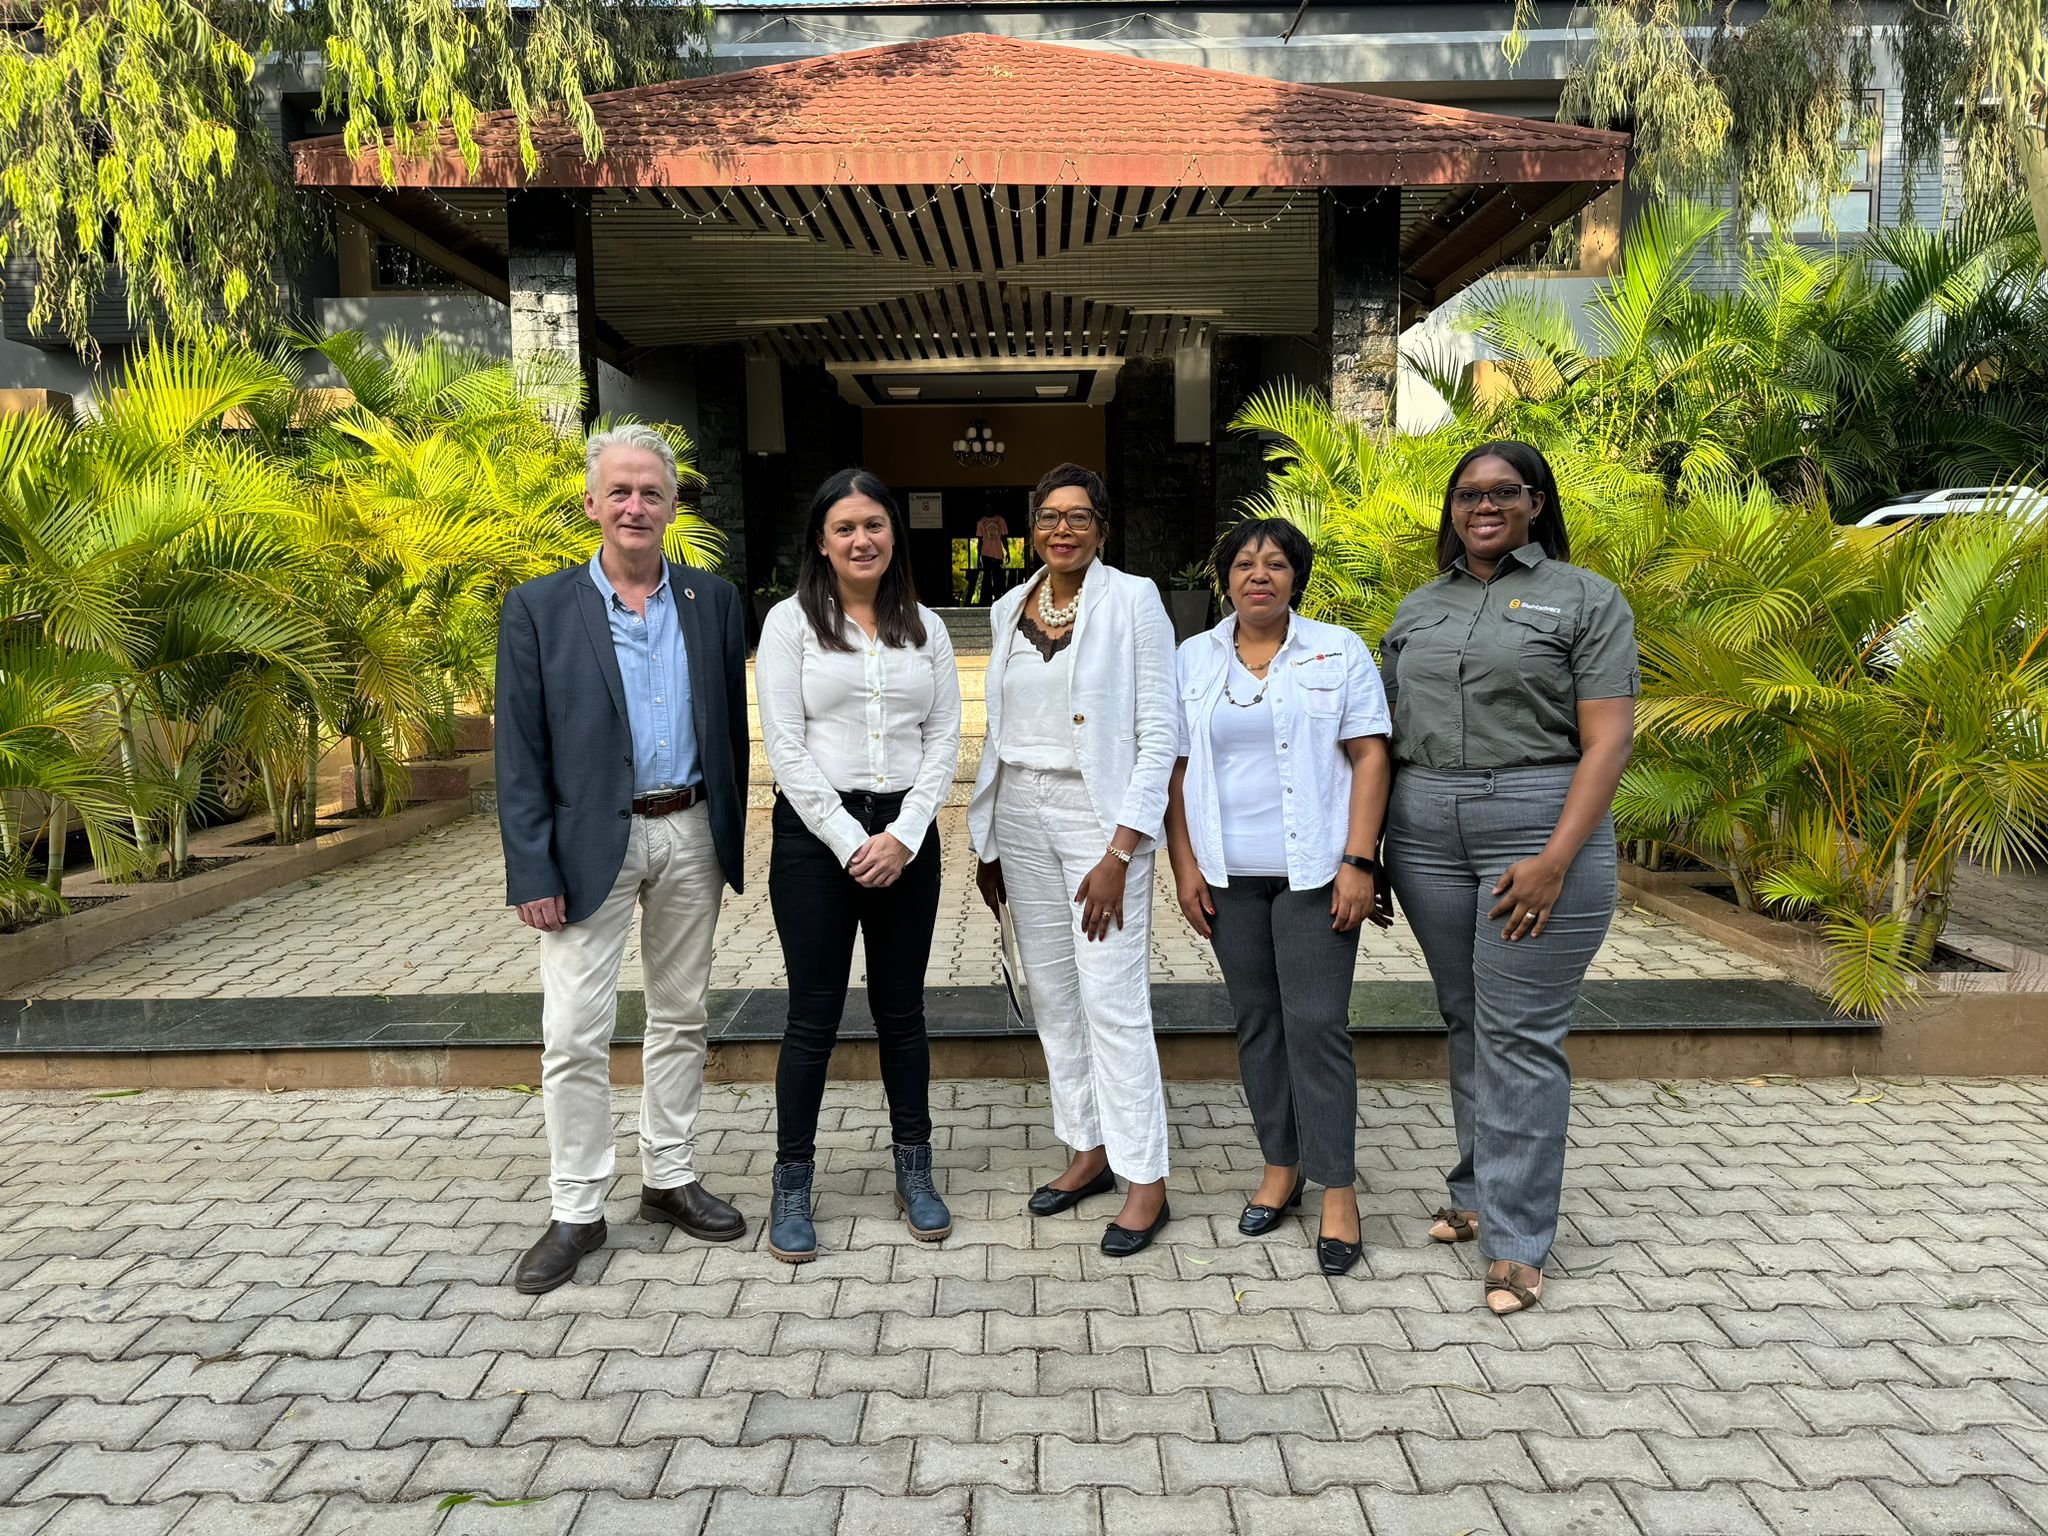 Stuart Halford of Uniting to Combat NTDs with Lisa Nandy MP, Uniting to Combat NTDs Board Member Dr Francisca Mutapi, Glenda Mulenga, Country Director for Zambia at Sightsavers, and Kaluba Lombe, Inclusive Eye Health Manager at Sightsavers